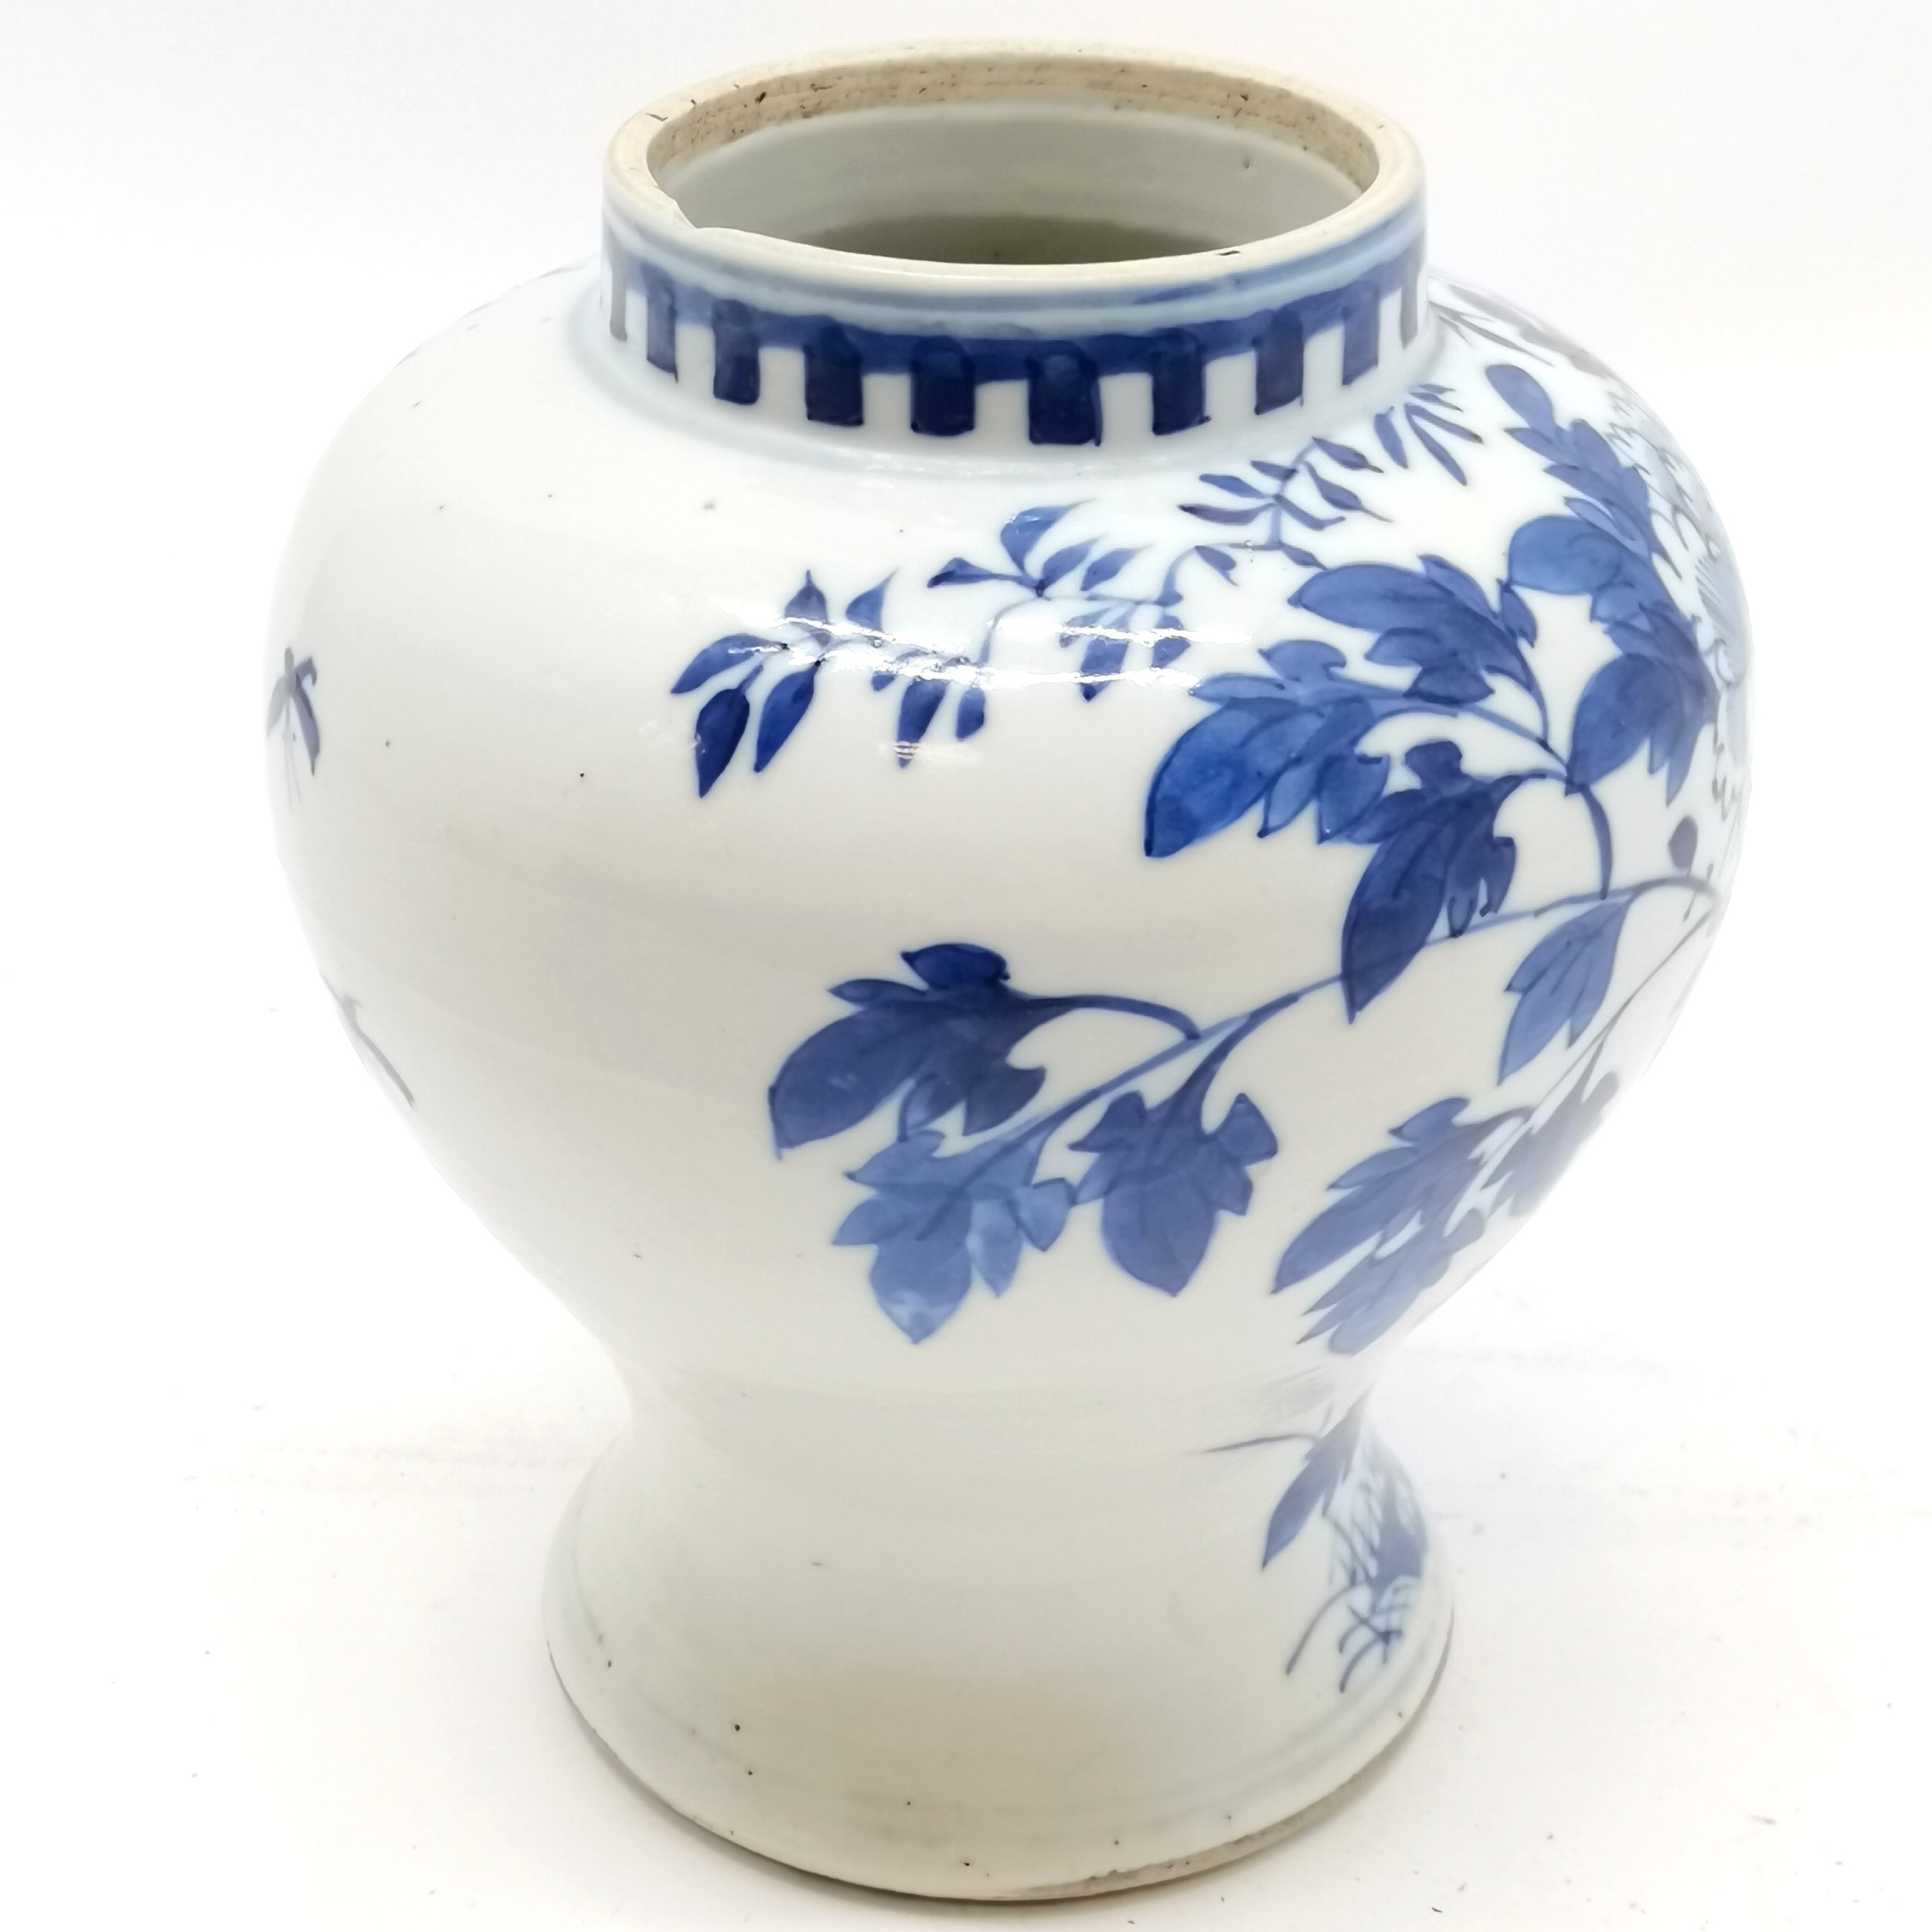 Antique Chinese blue & white decorated pot with bird / flower detail (16cm high) - has chip to rim & - Image 6 of 6